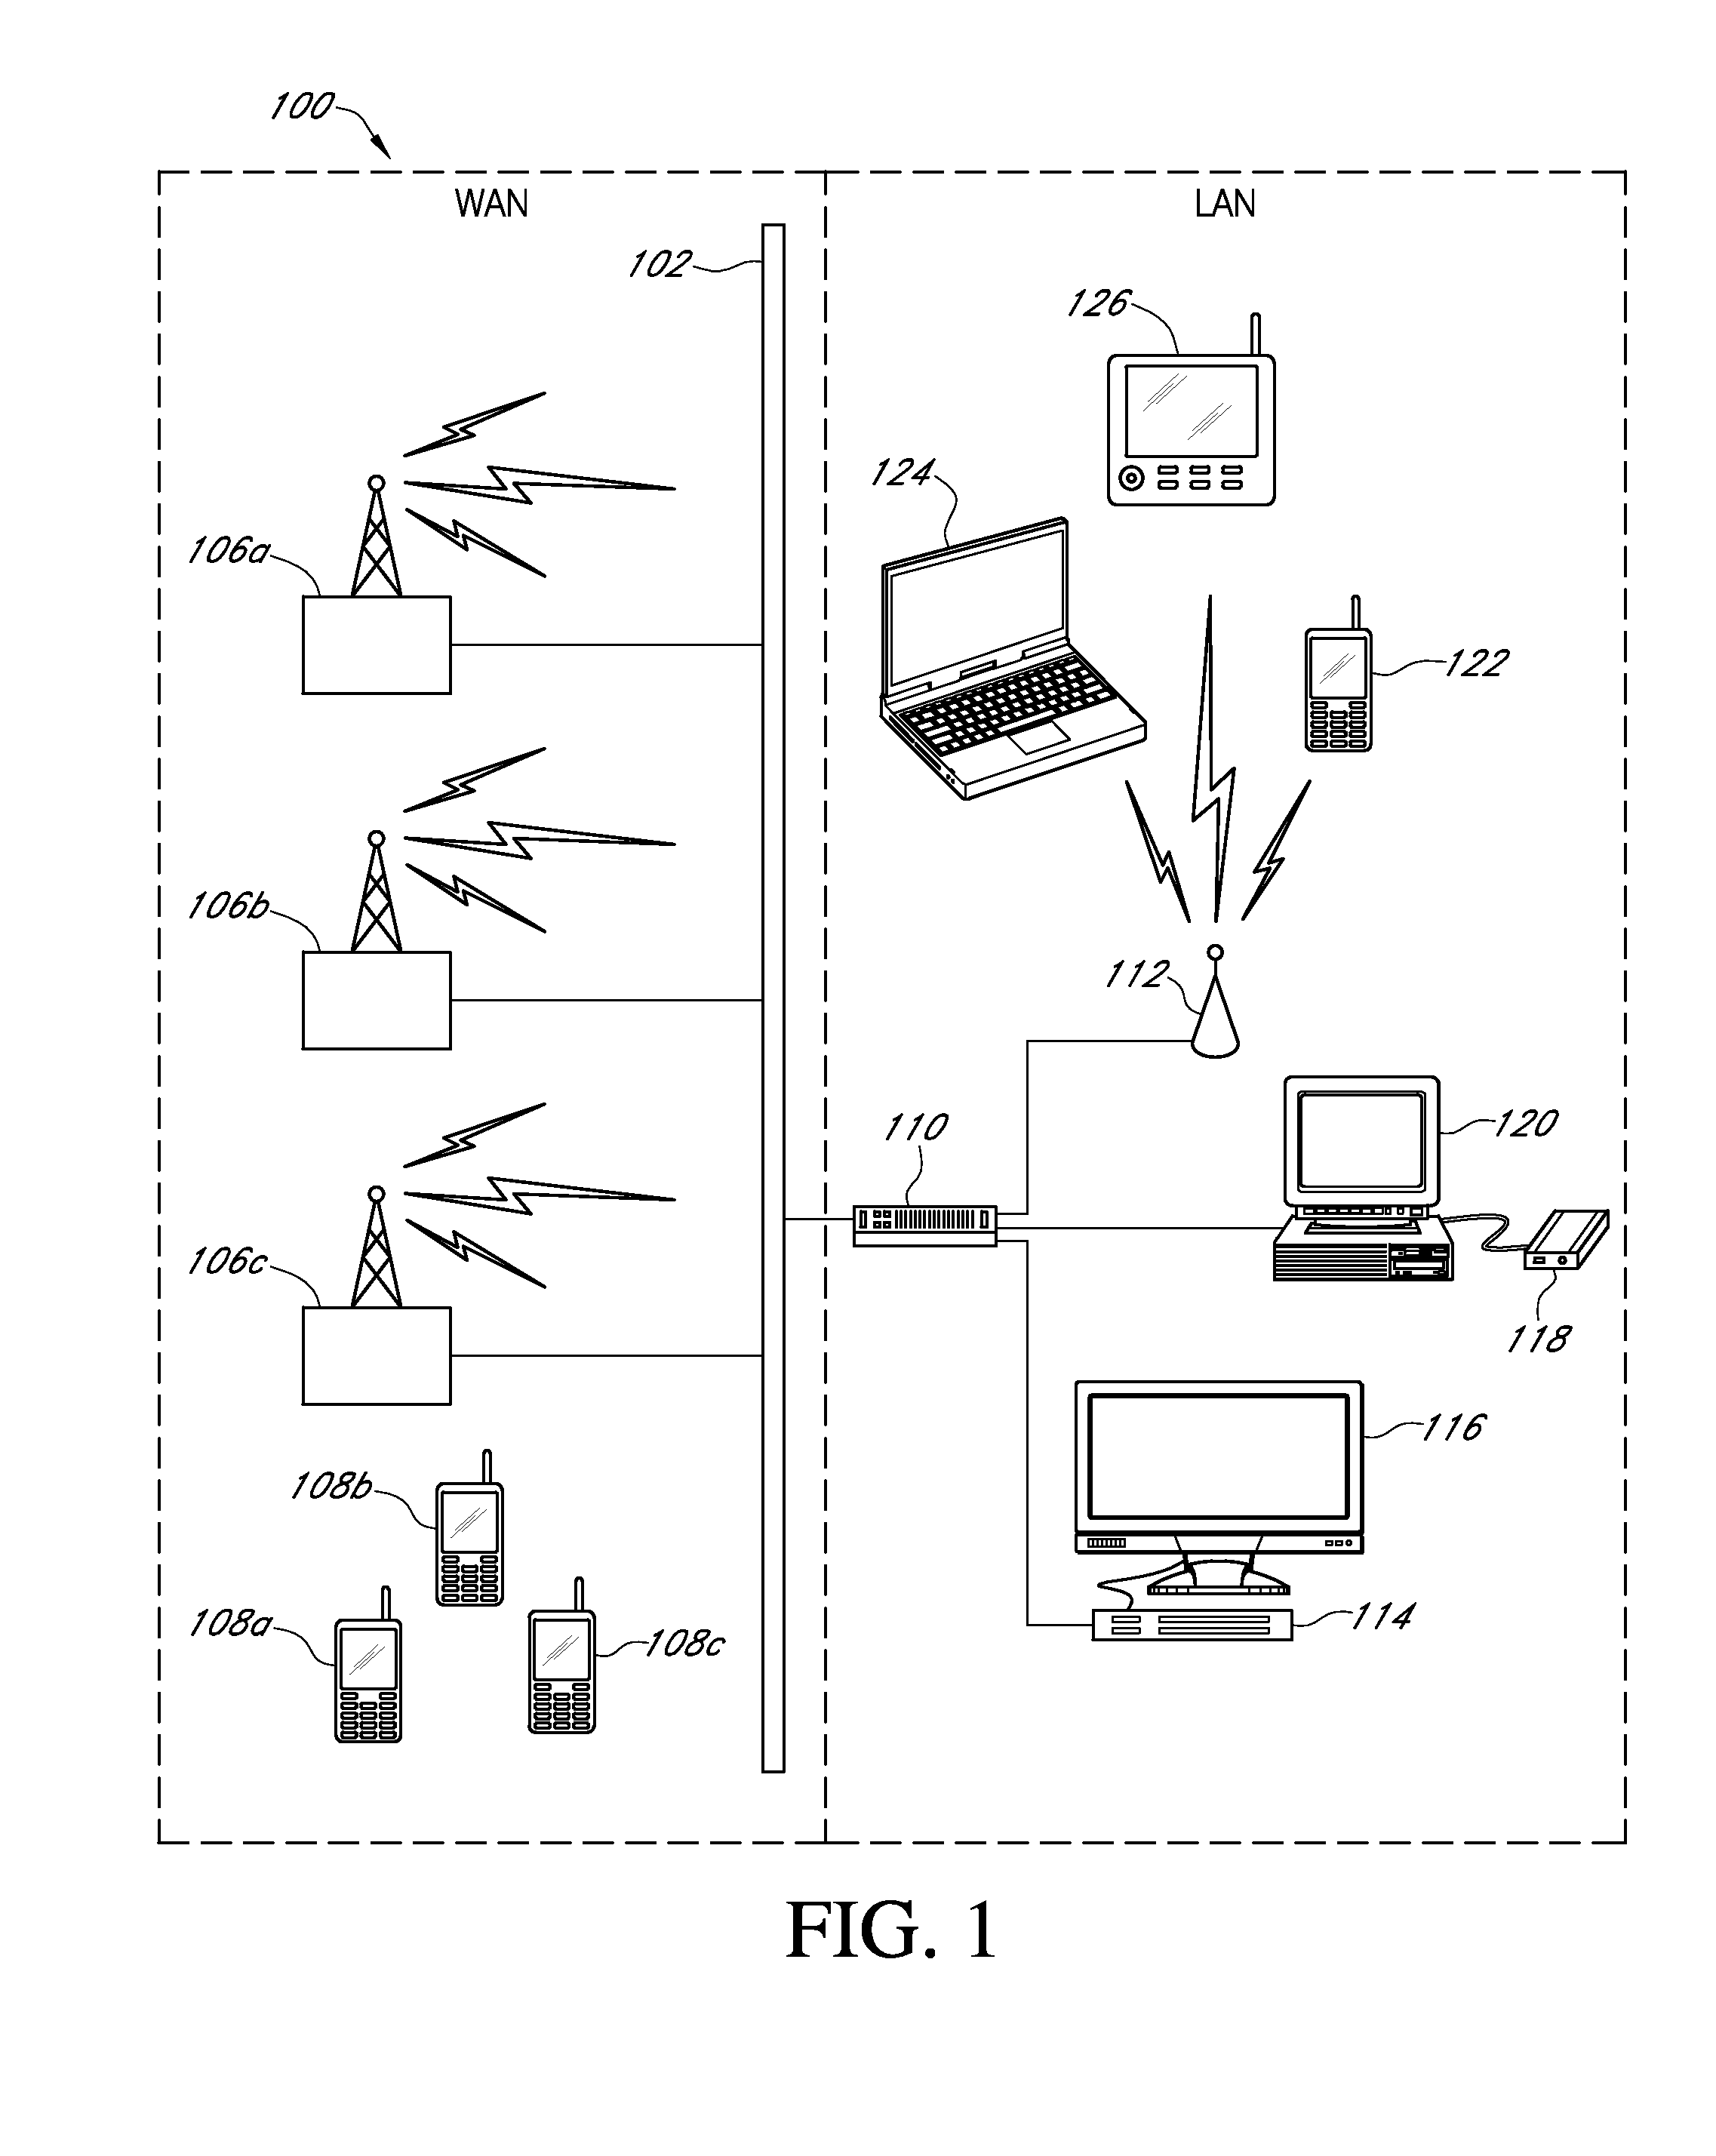 Systems and methods for optimizing short range wireless communications within a larger wireless network